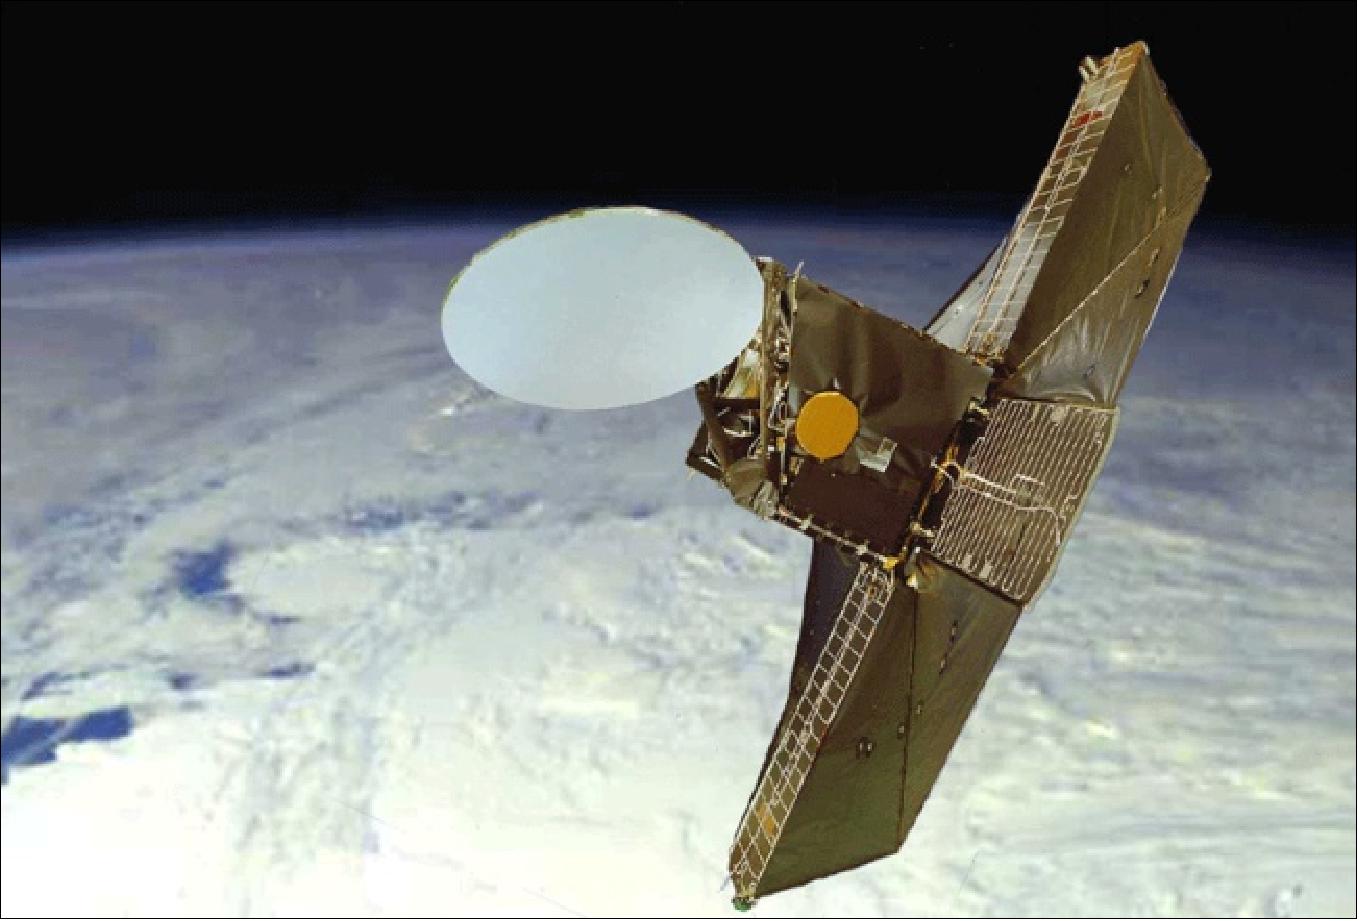 Figure 2: Illustration of the deployed Odin spacecraft (image credit: SSC)